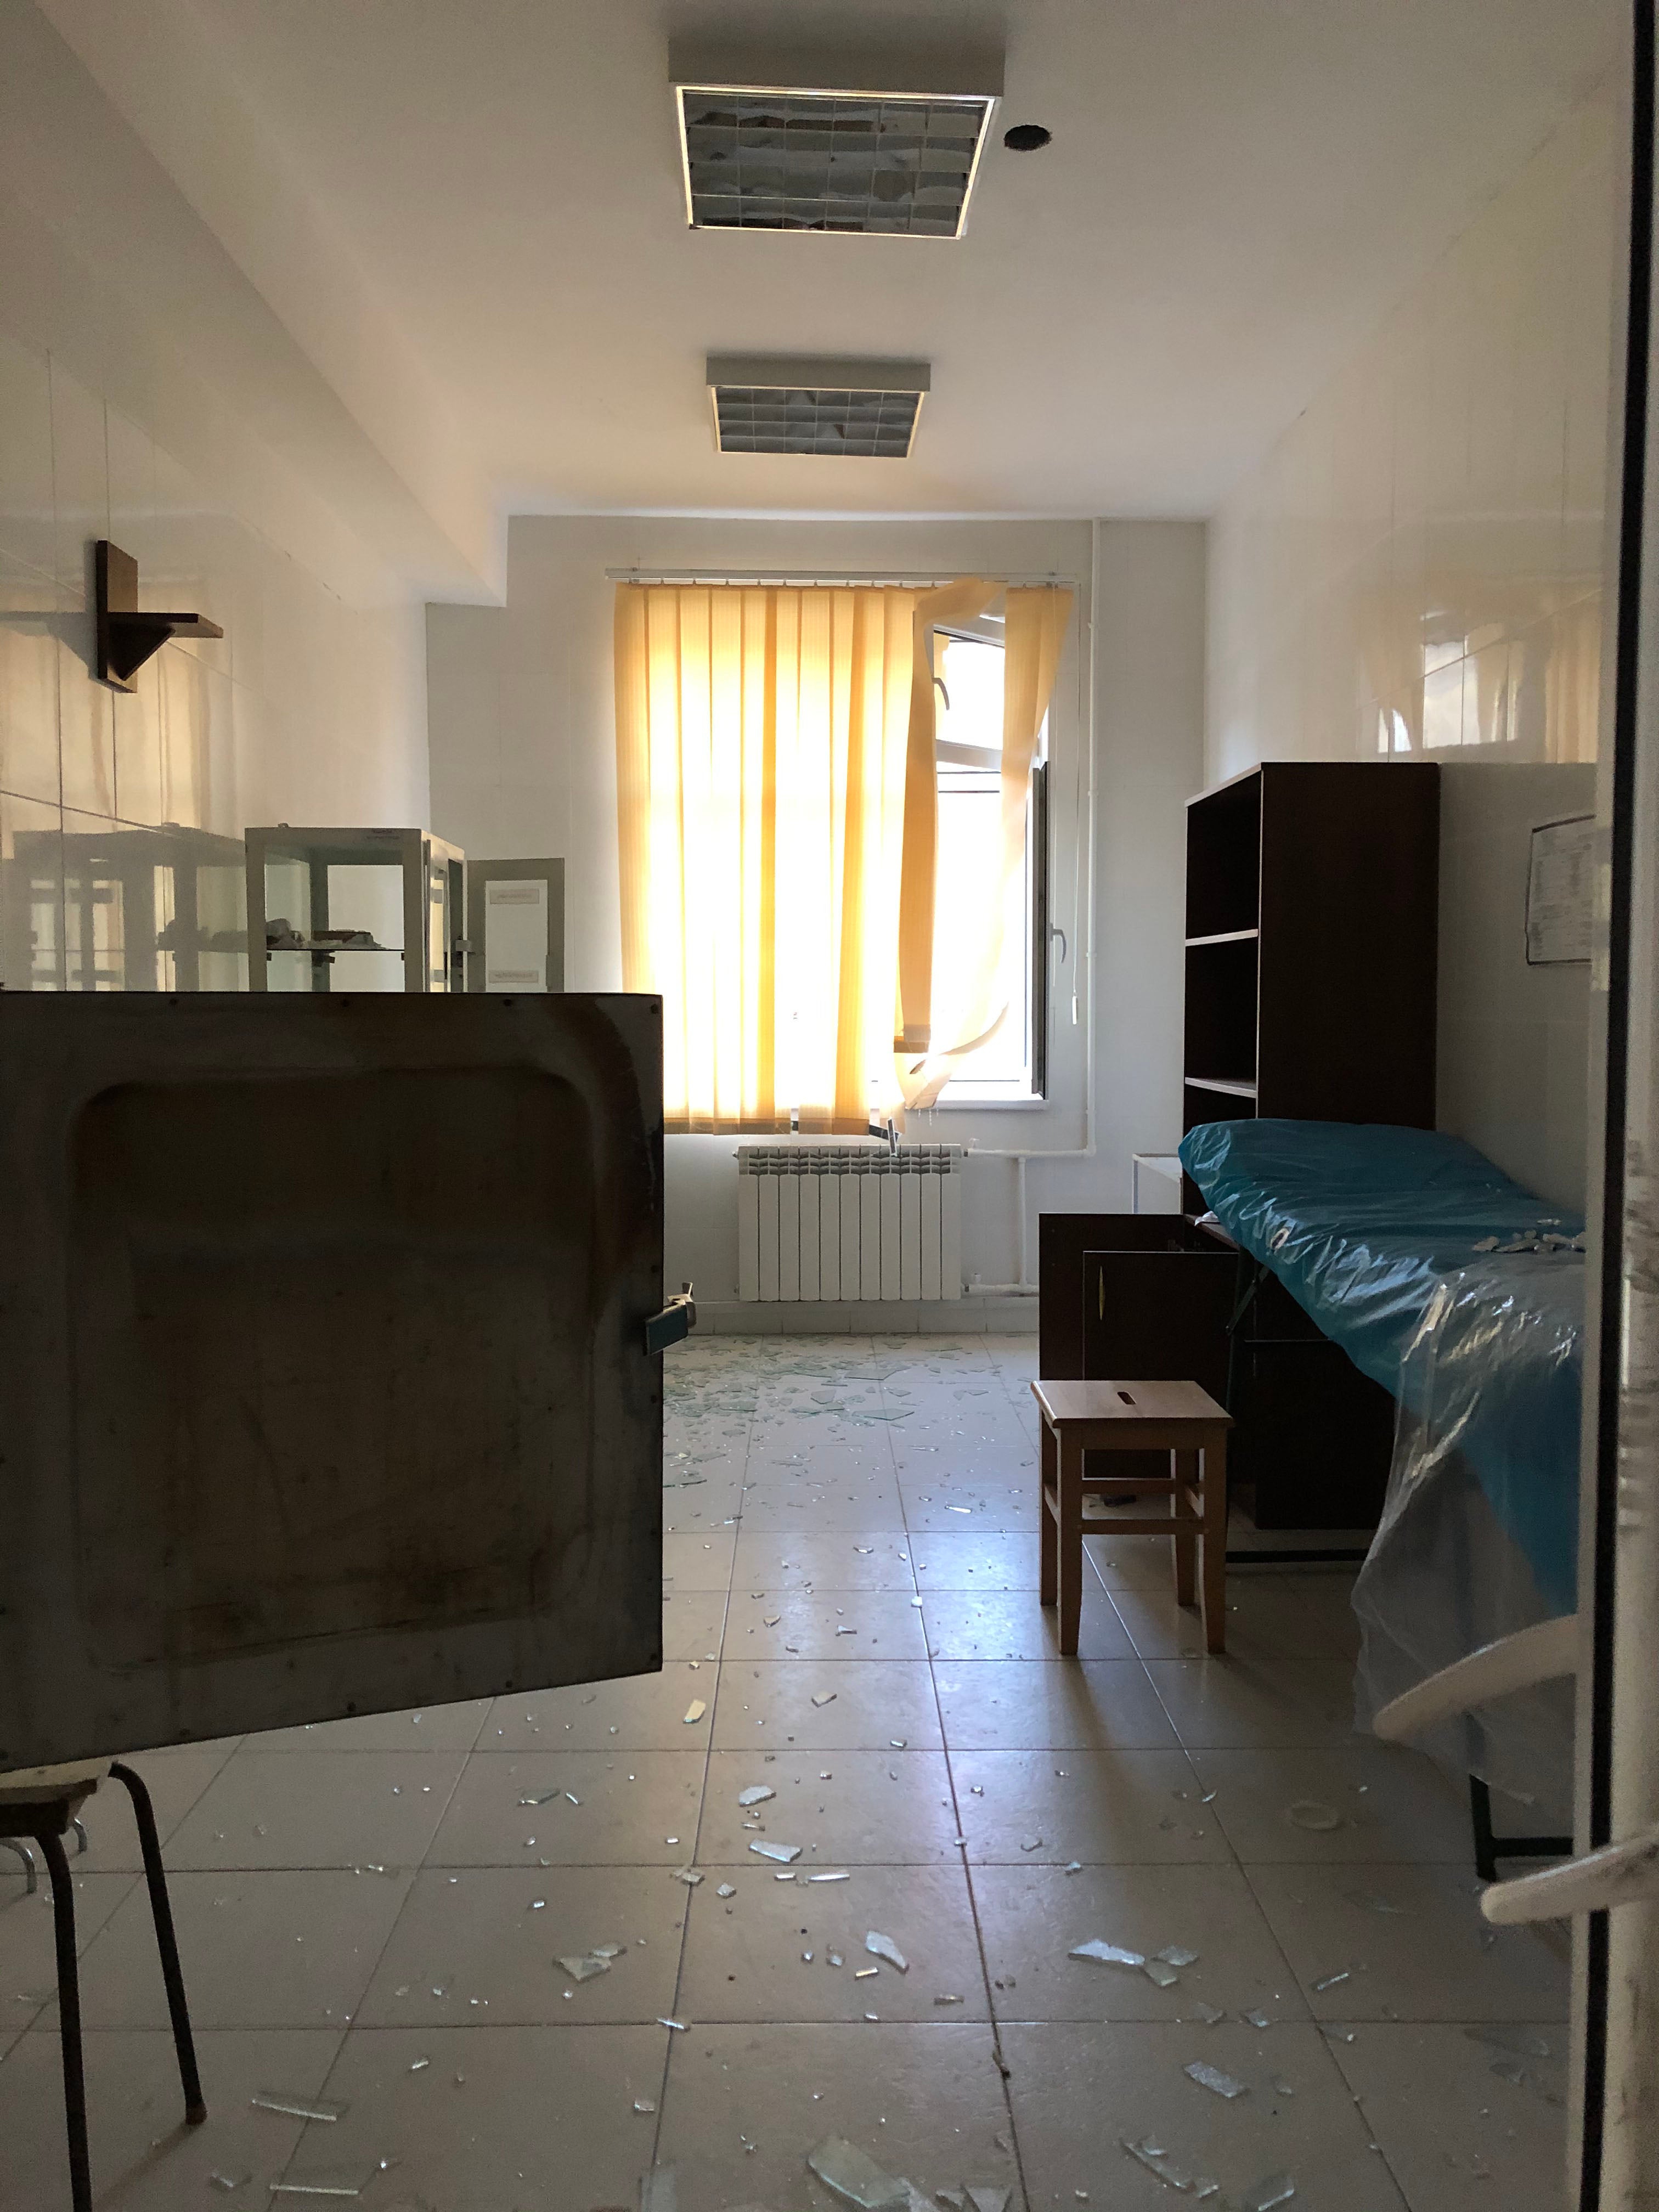 One of the rooms at the Martakert military hospital damaged in the October 14, 2020 attack by Azerbaijani forces, Martakert, Nagorno-Karabakh.